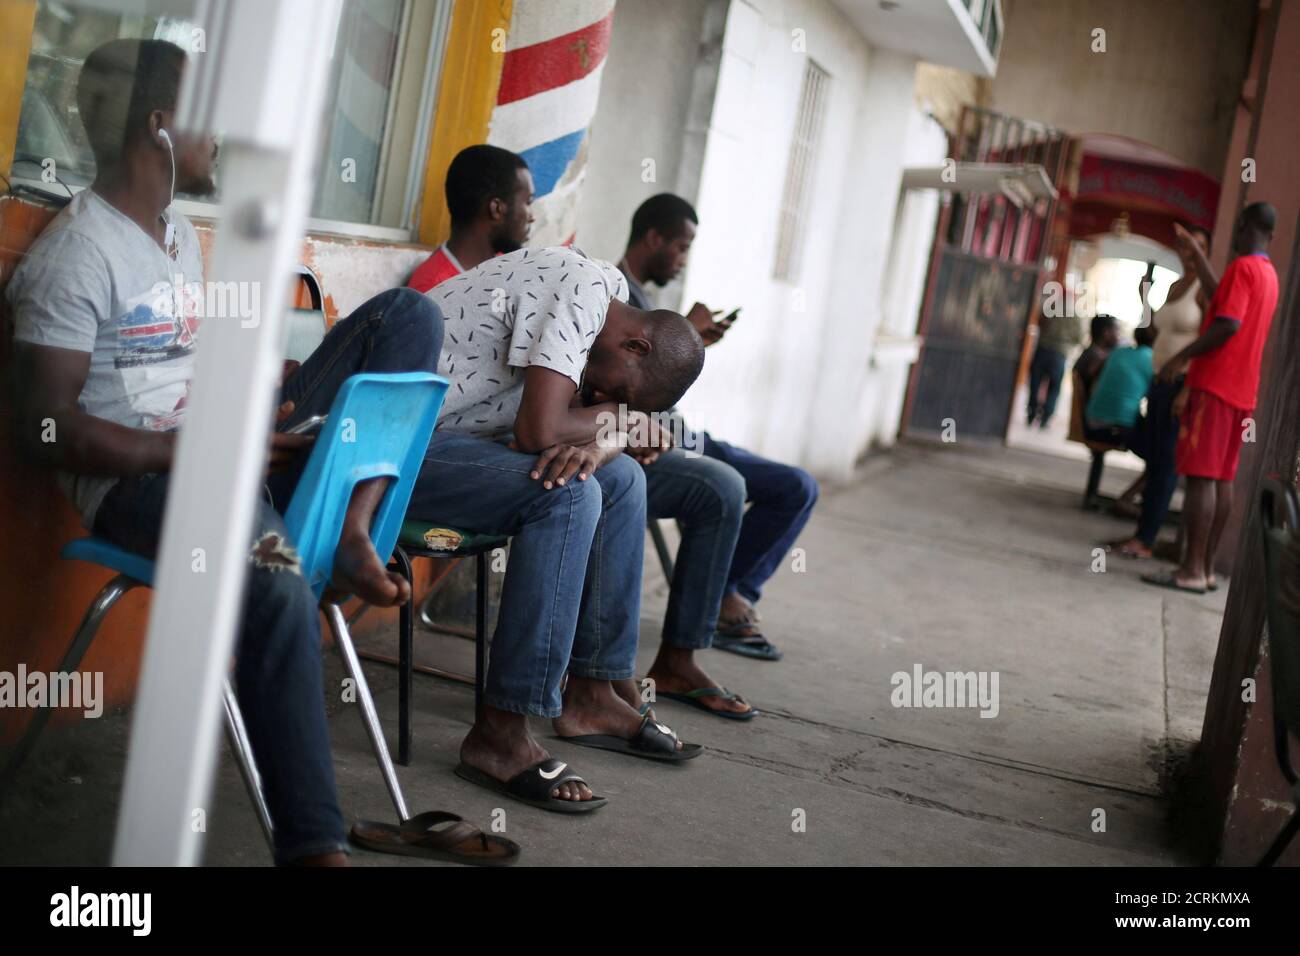 Congolese migrants intending to seek asylum in the U.S. sit outside a cybercafe in Mexicali, Mexico, October 5, 2016. REUTERS/Edgard Garrido Stock Photo